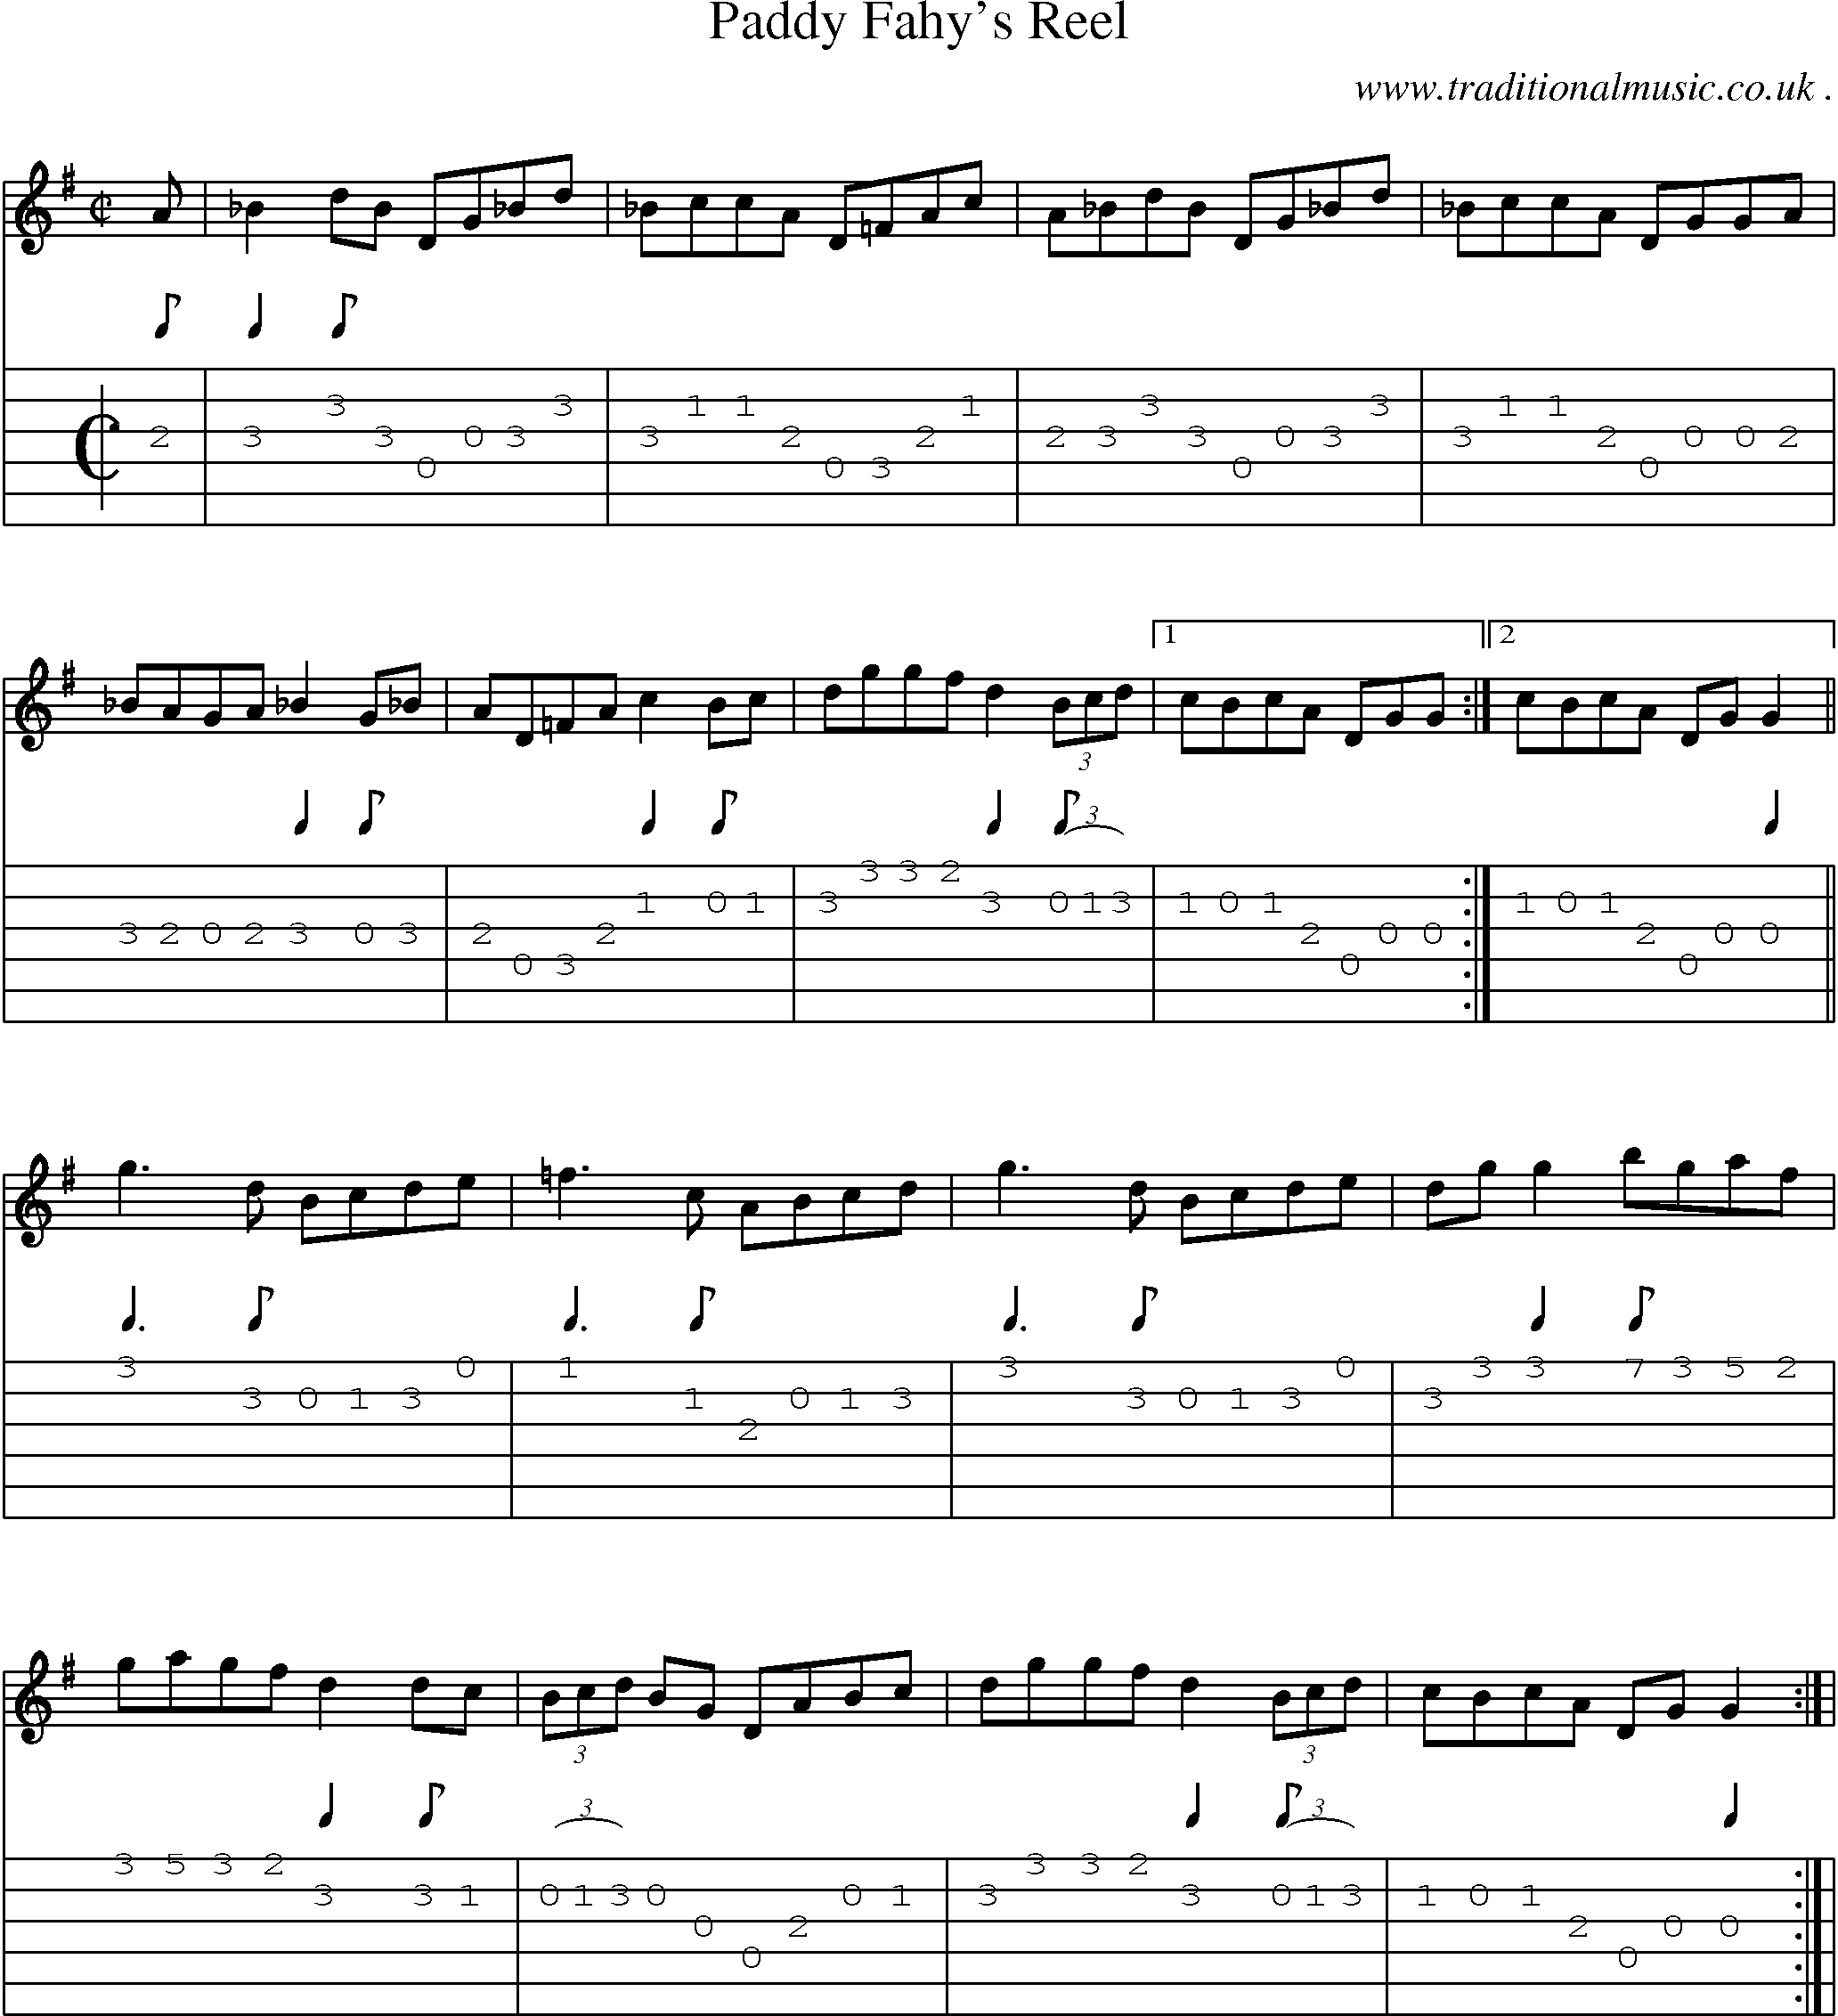 Sheet-Music and Guitar Tabs for Paddy Fahys Reel